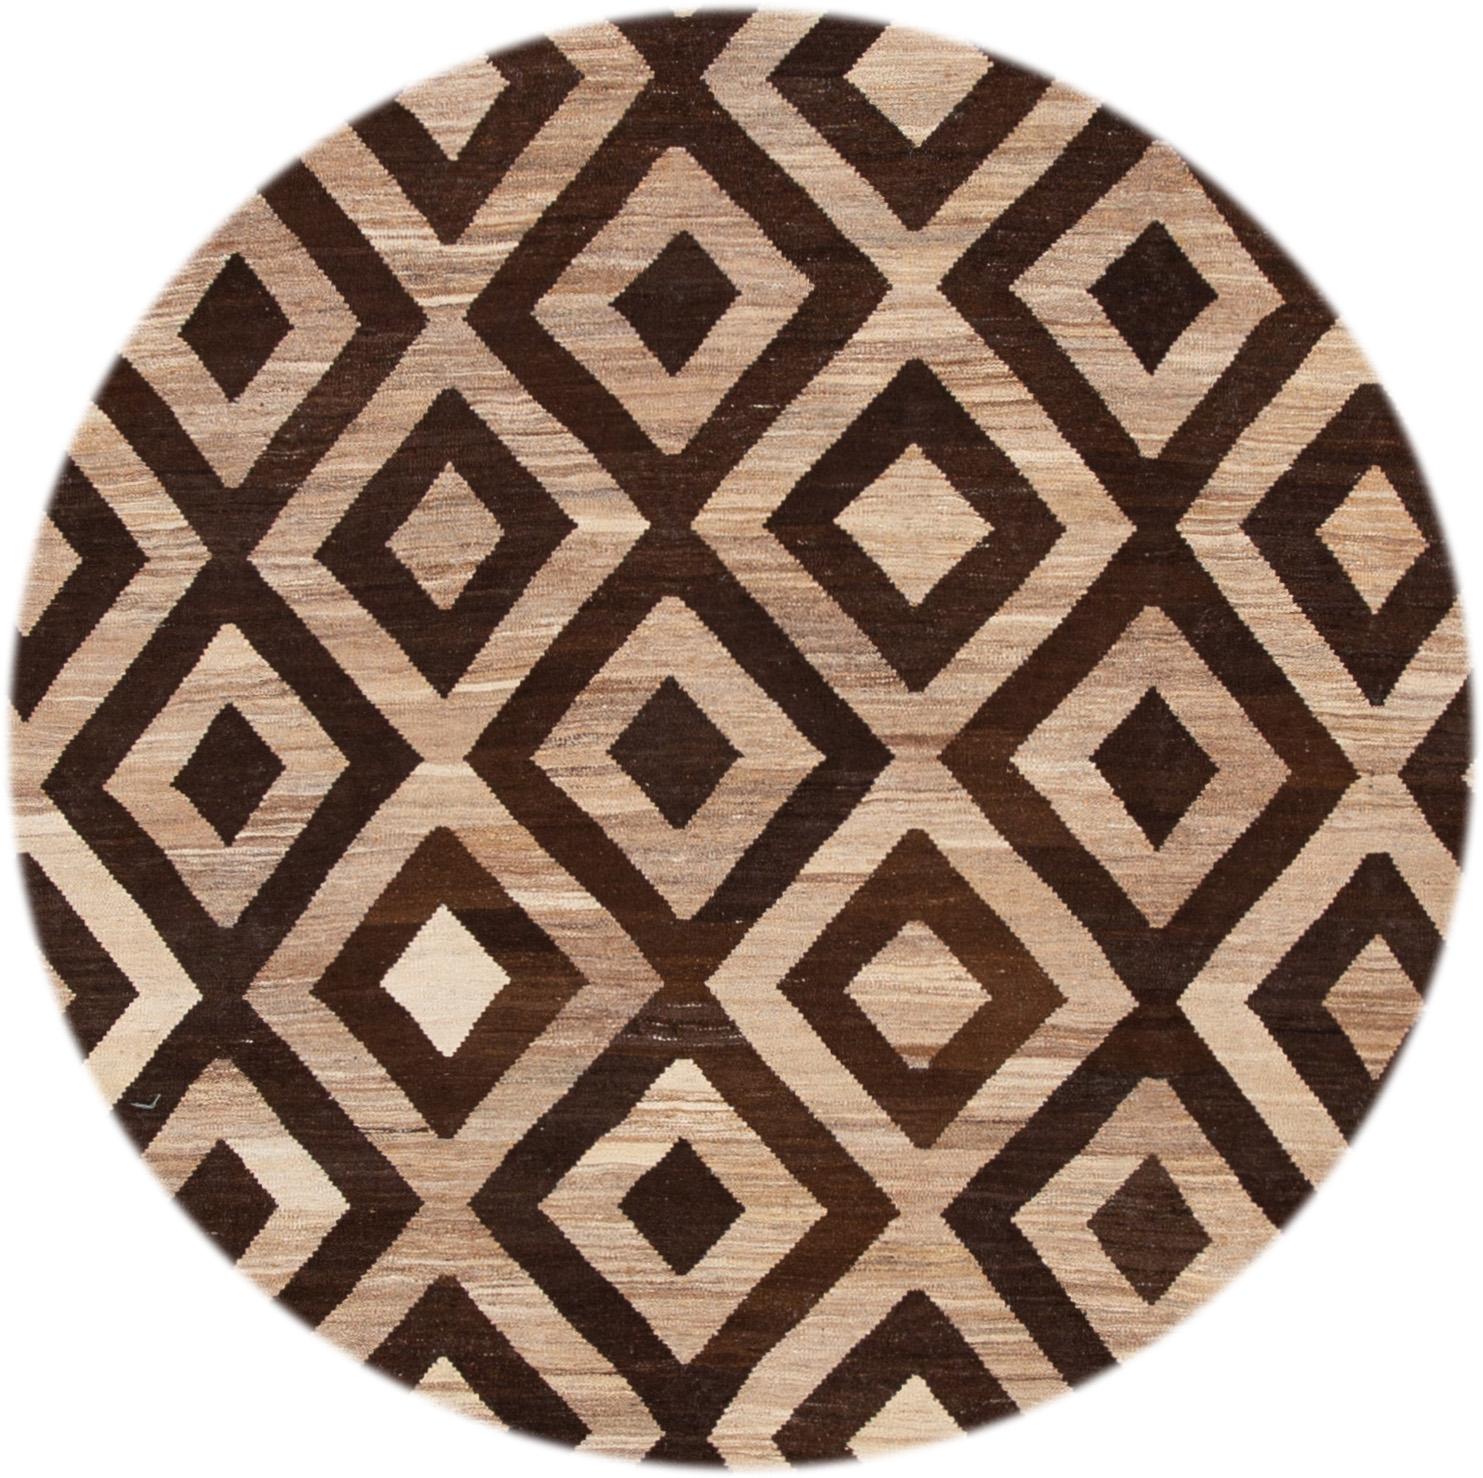 Beautiful hand knotted wool, modern Turkish Kilim wool rug. This rug features a brownfield with abstract, tan interlocking geometric designs. 

This rug measures: 10' 1